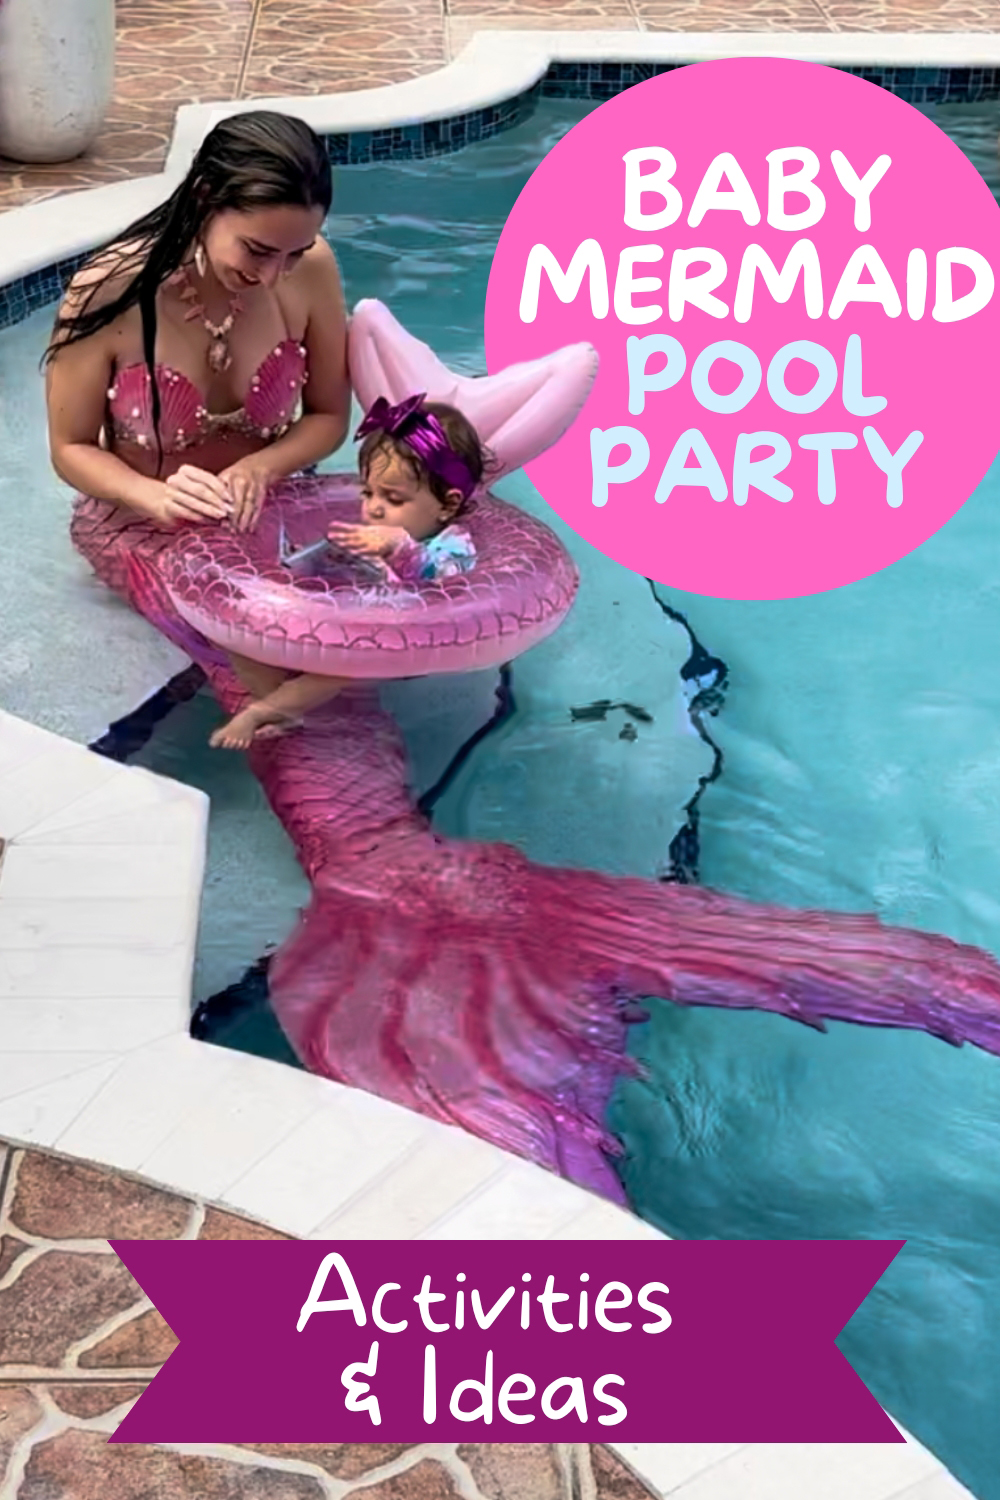 Baby pool party ideas for a mermaid birthday party